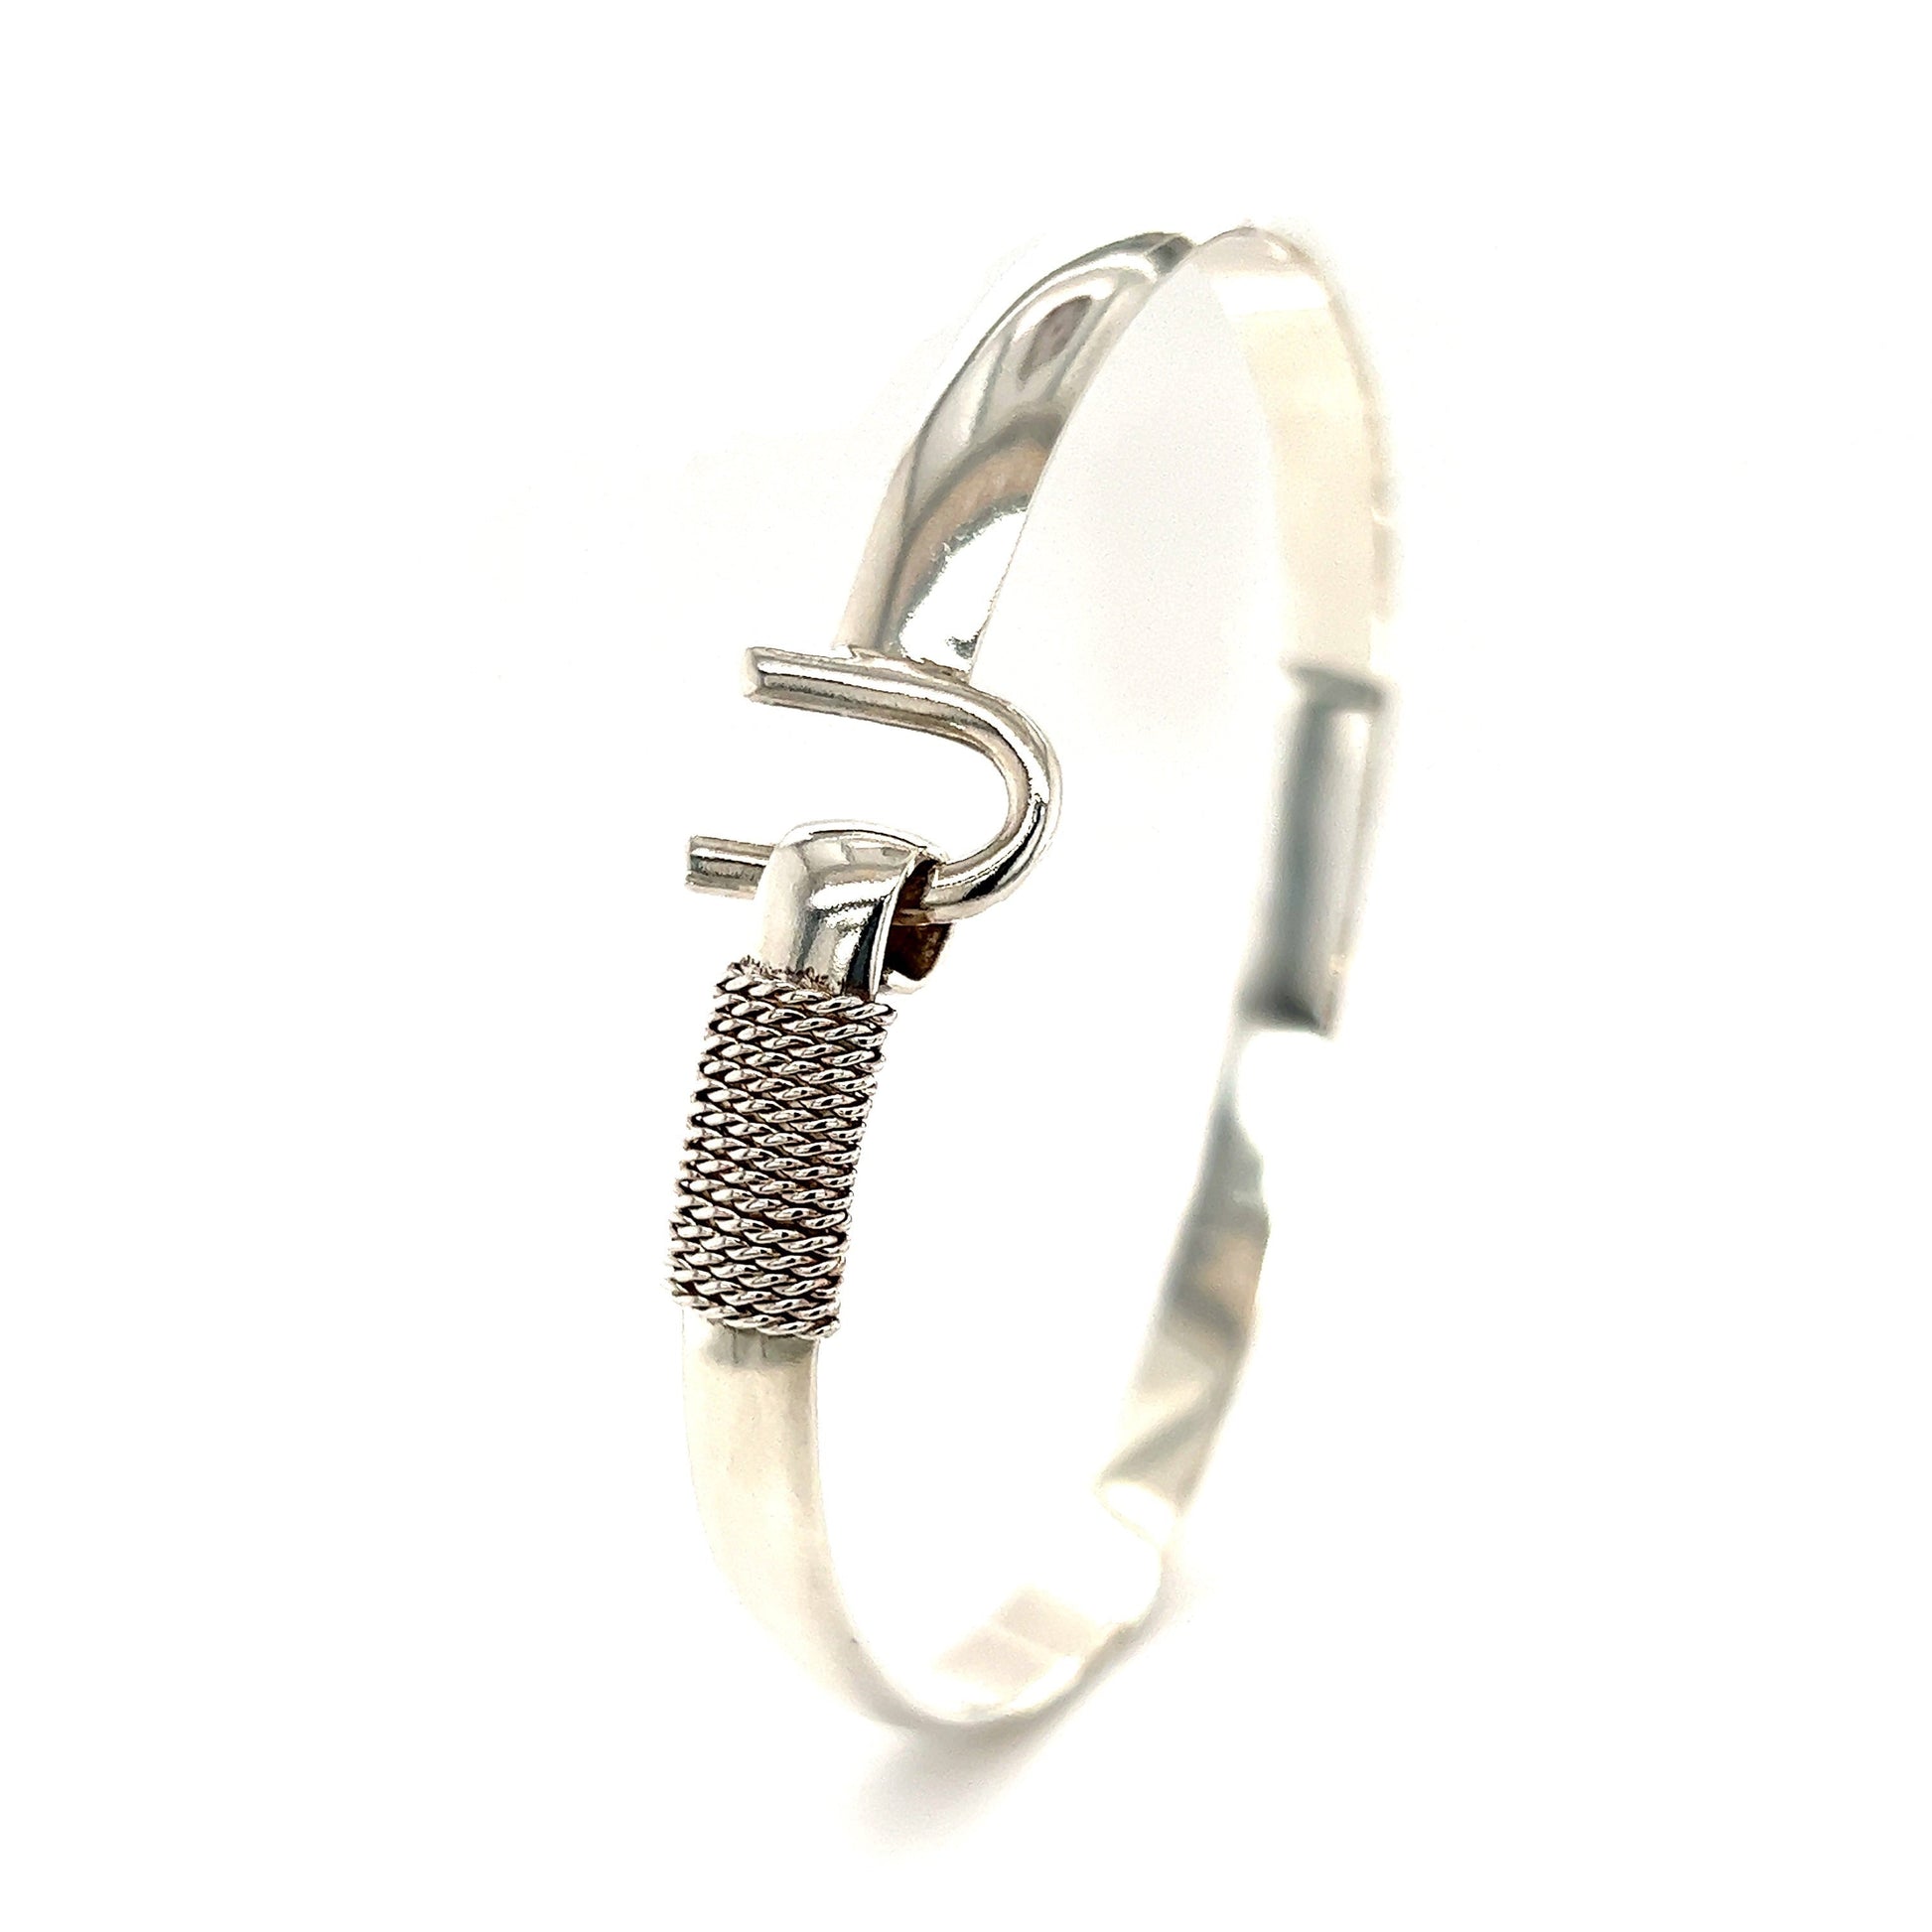 U Flat 6mm Bangle Bracelet with U-Hook Clasp in Sterling Silver Angle View